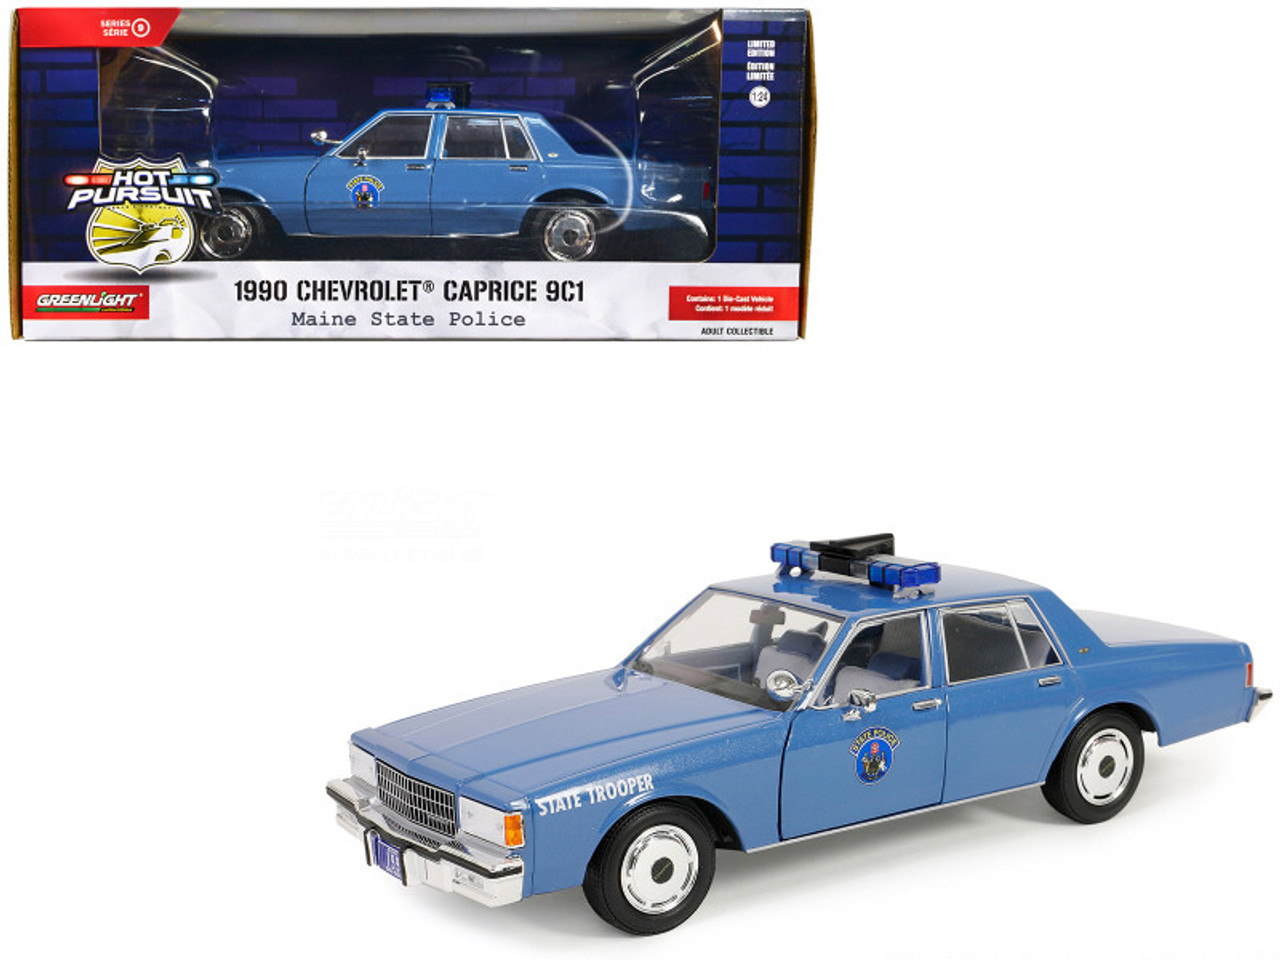 1990 Chevrolet Caprice 9C1 Blue "Maine State Police" "Hot Pursuit" Series 9 1/24 Diecast Model Car by Greenlight